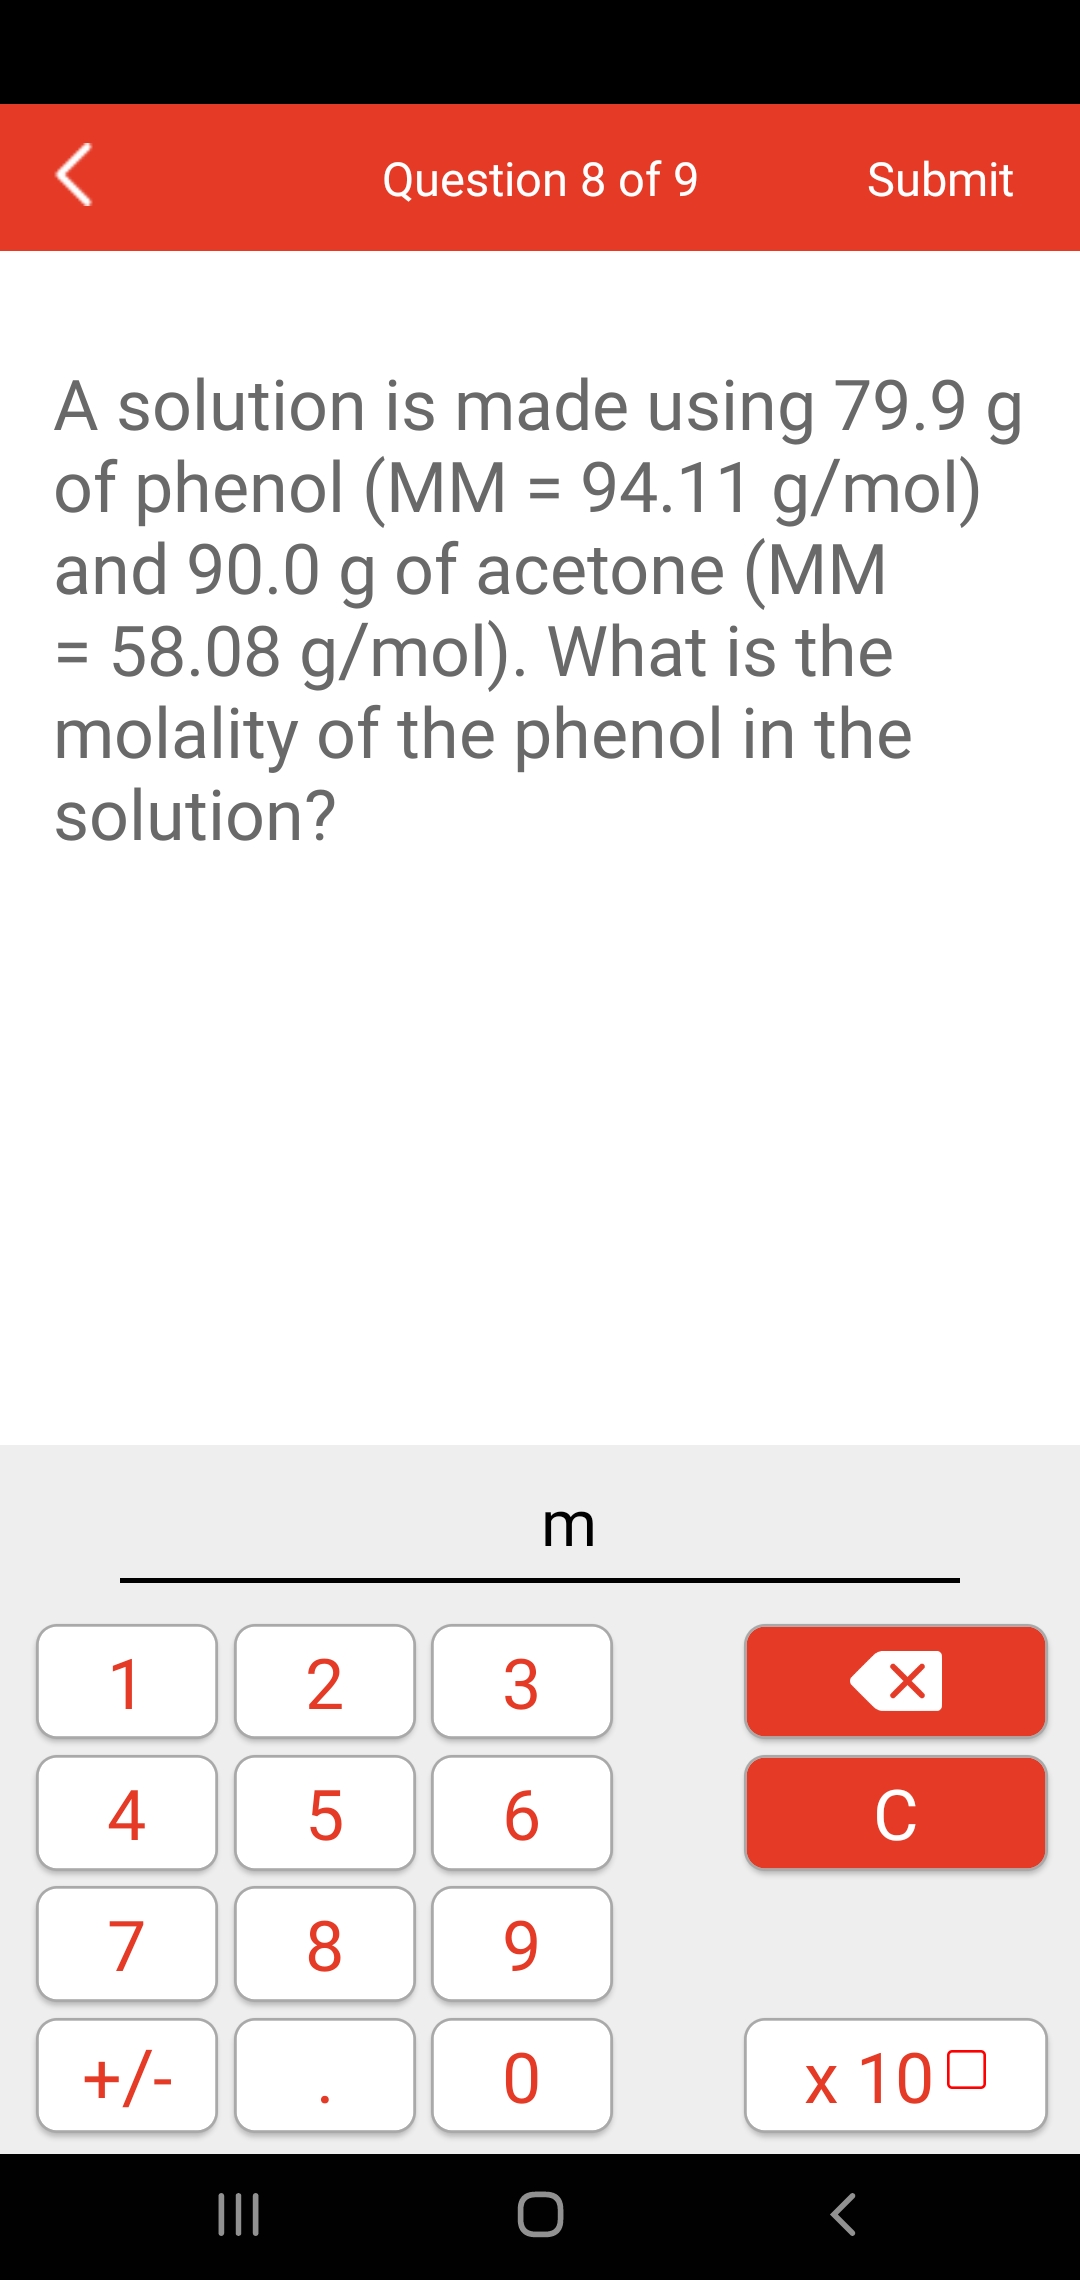 Question 8 of 9
Submit
A solution is made using 79.9 g
of phenol (MM = 94.11 g/mol)
and 90.0 g of acetone (MM
= 58.08 g/mol). What is the
molality of the phenol in the
solution?
m
1
4
5
6
C
7
8
9.
+/-
x 100
